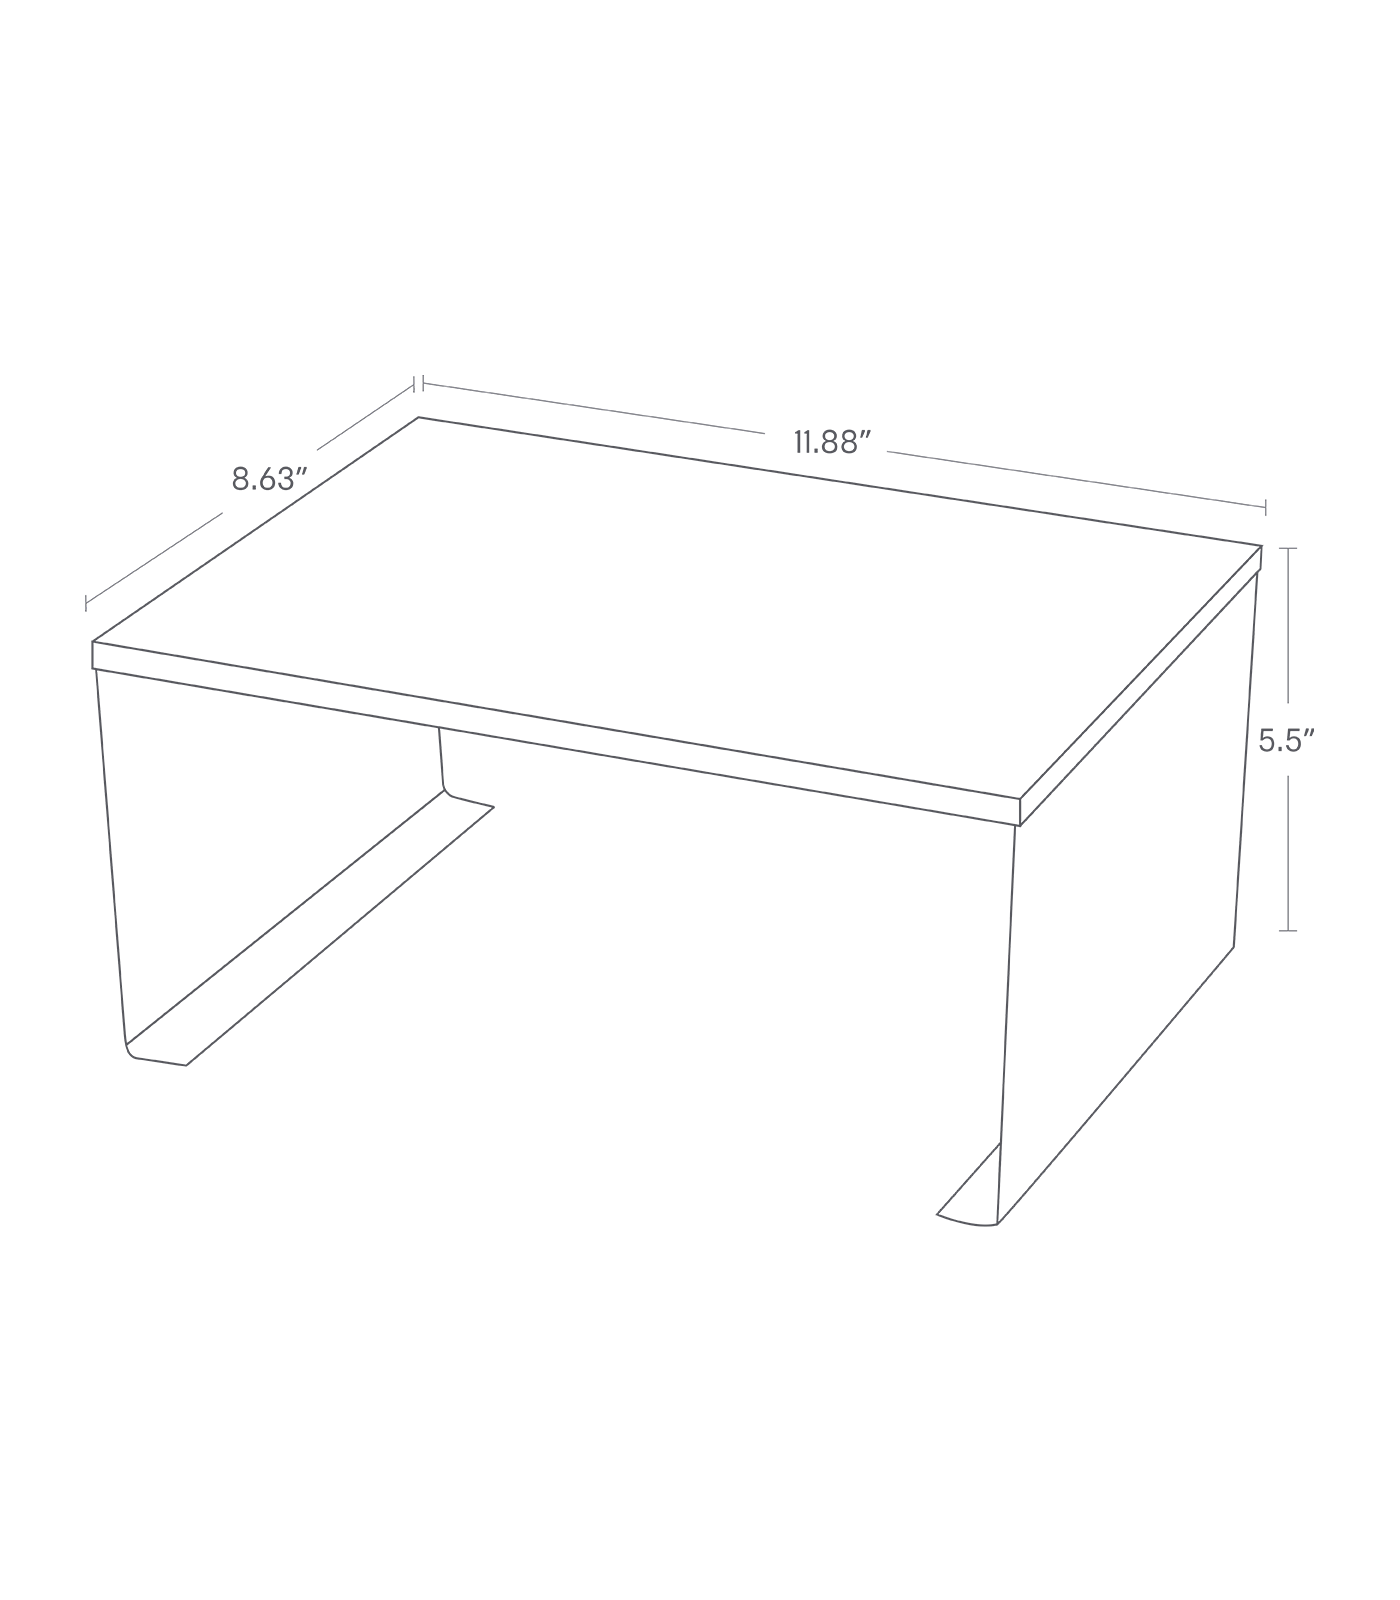 Dimension image for Stackable Countertop Shelf - Two Sizes on a white background including dimensions  L 8.66 x W 12.01 x H 5.71 inches